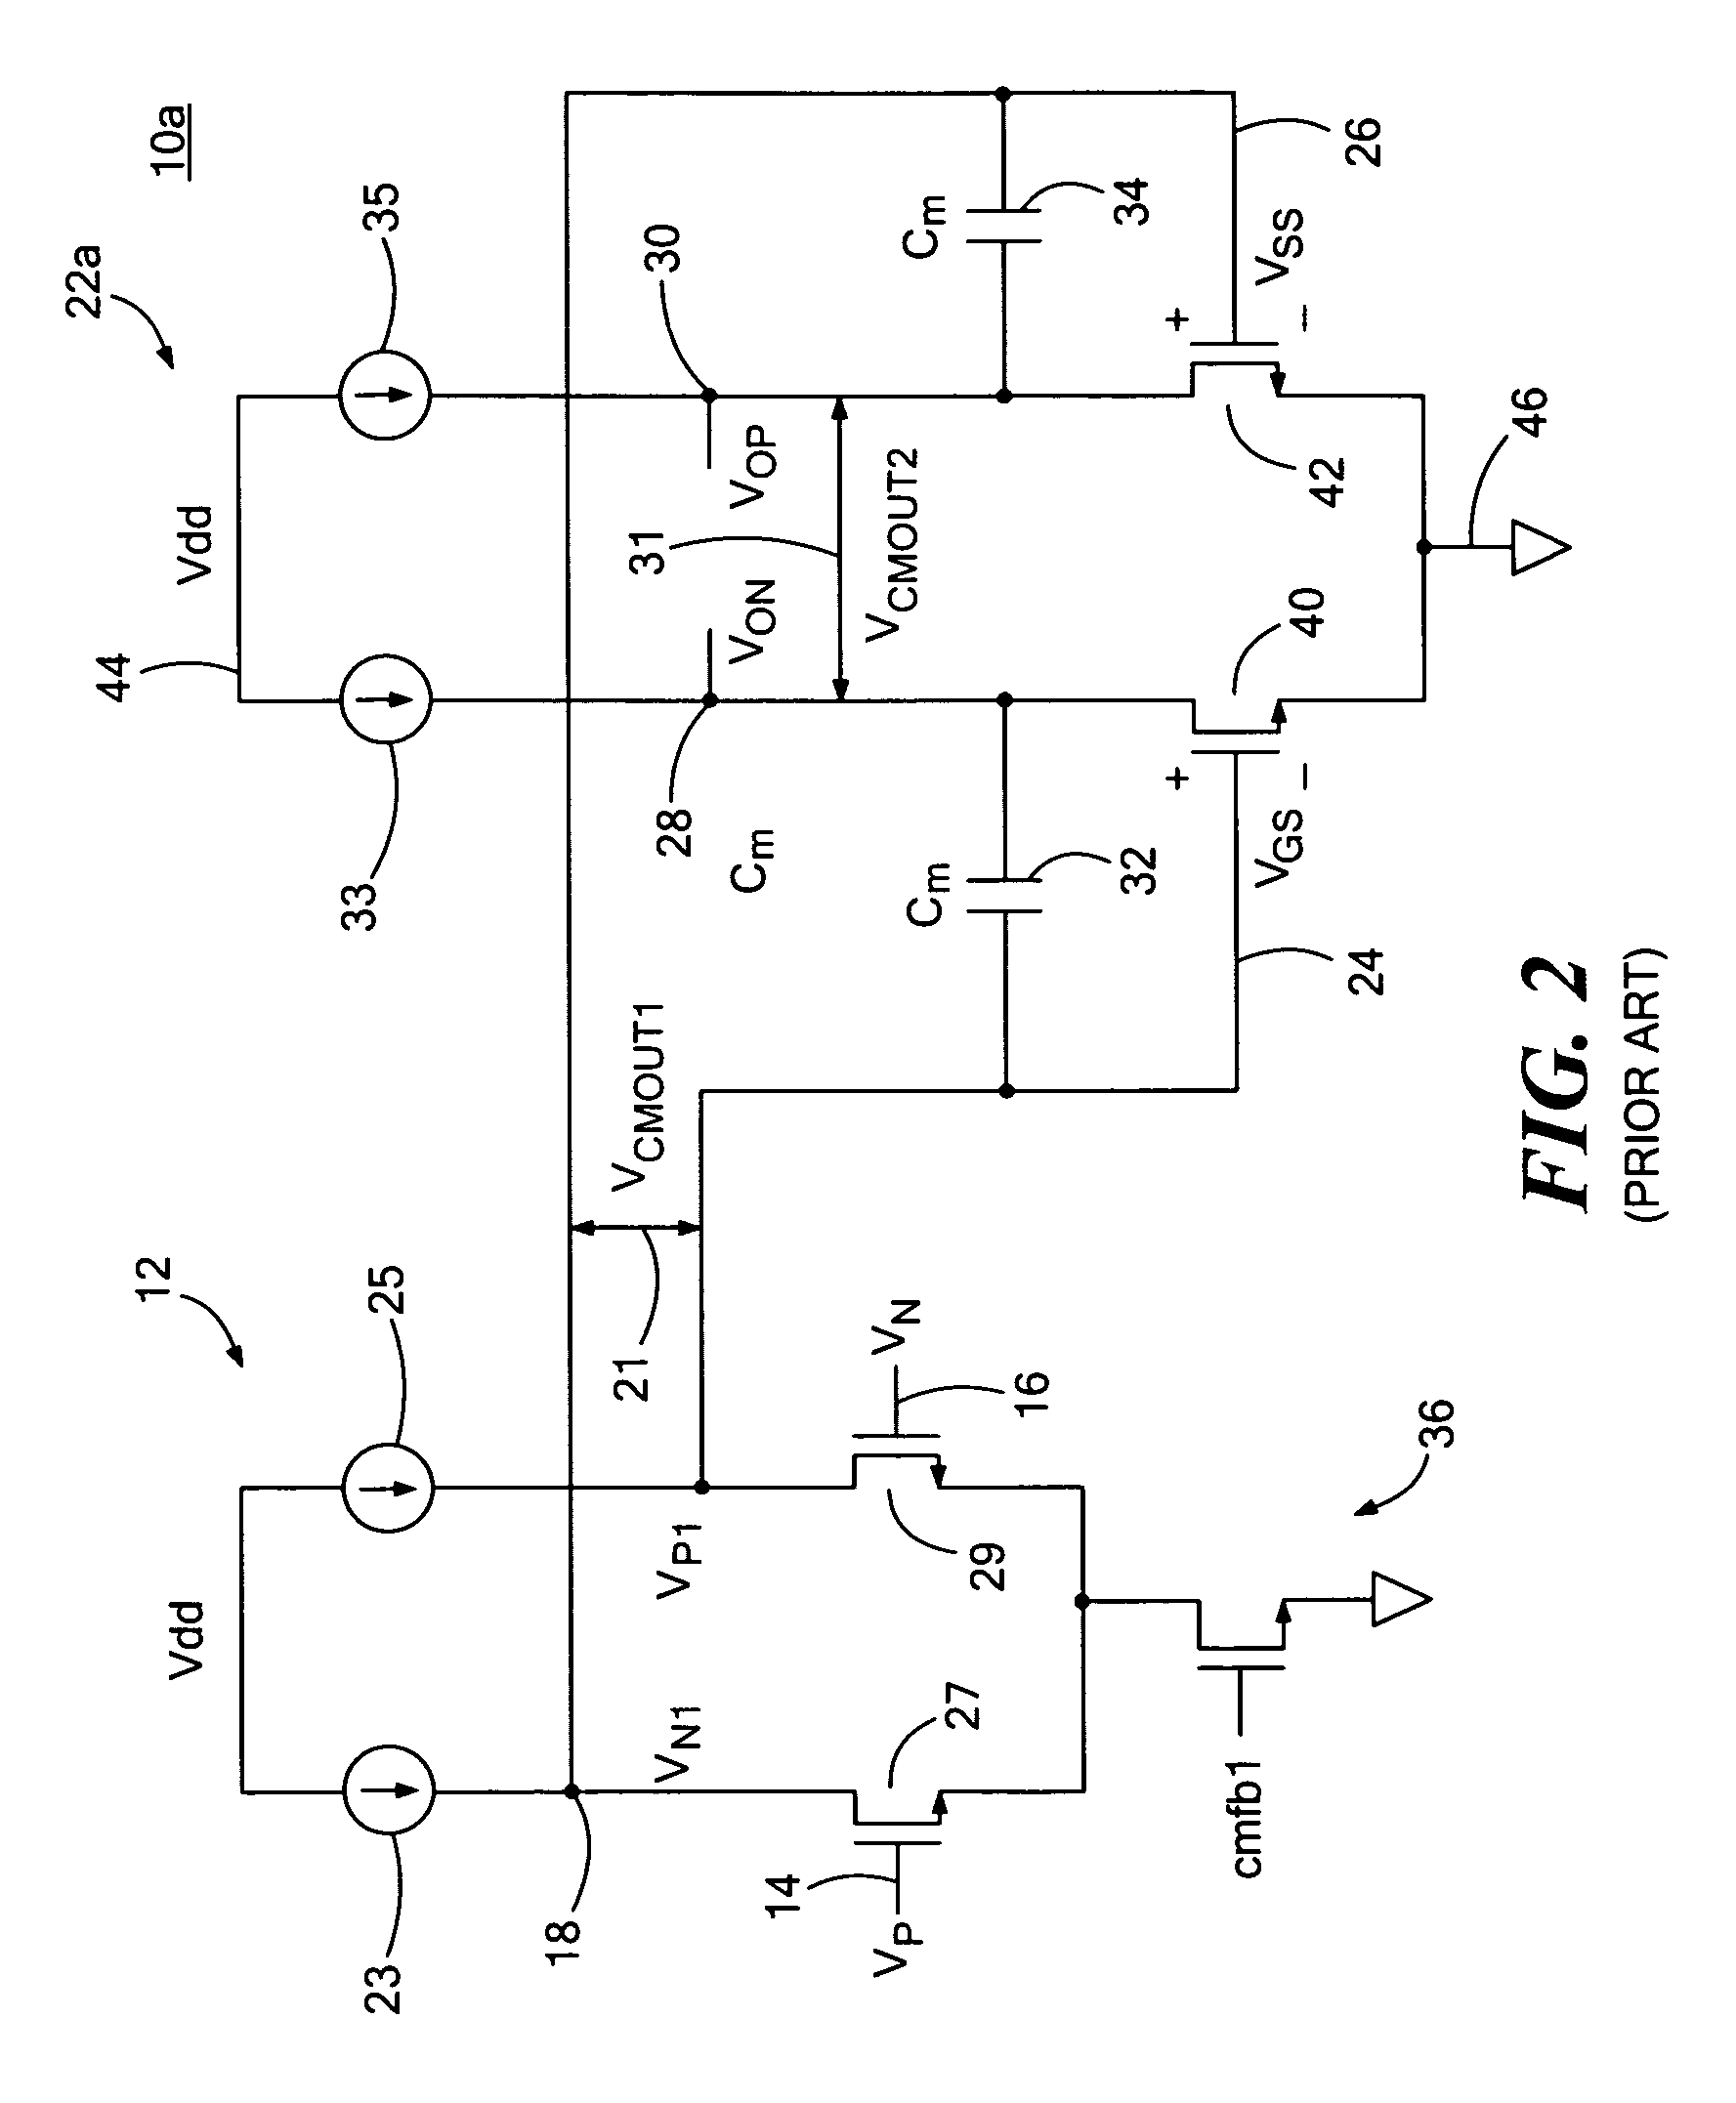 Differential two-stage miller compensated amplifier system with capacitive level shifting